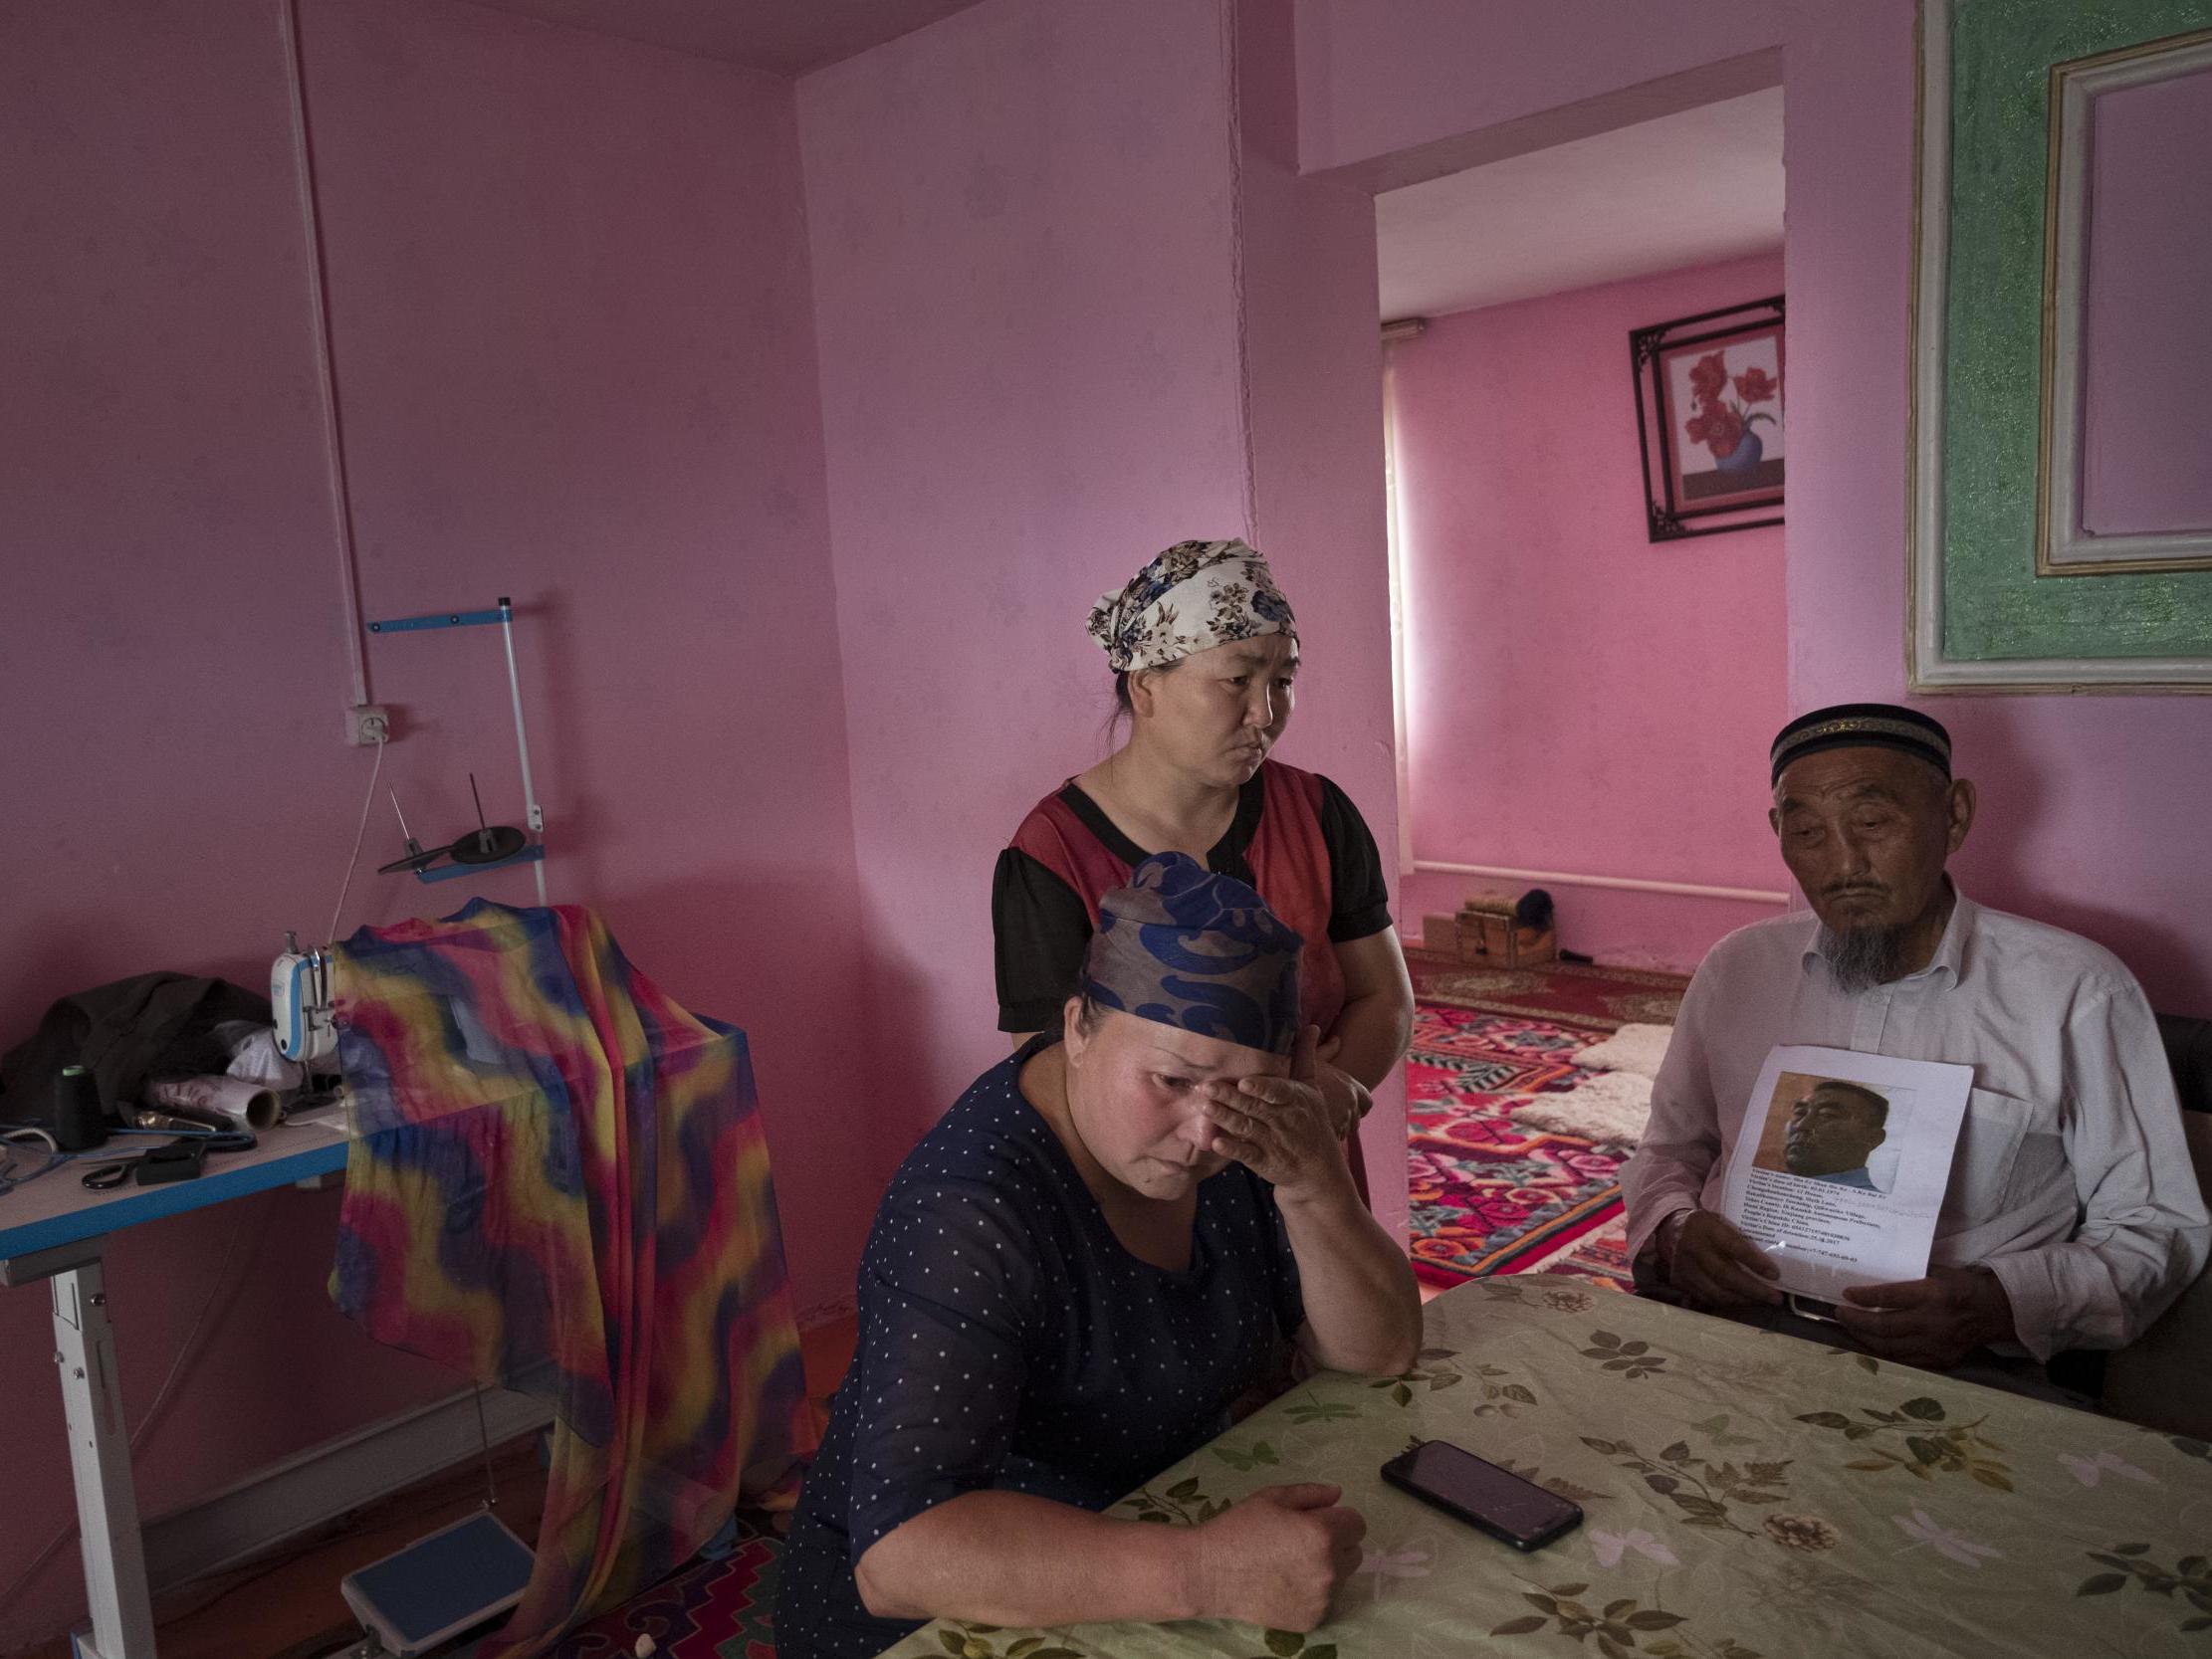 Auelkhan (centre) visits with Gulnar Kosdaulet (left), and Akbar Yenkelesh in their home in Akshi. Kosdaulet's husband, Sarsenbek Akbar, is in a camp in Xinjiang. Yenkelesh, her father-in-law, holds up a photo of his son.